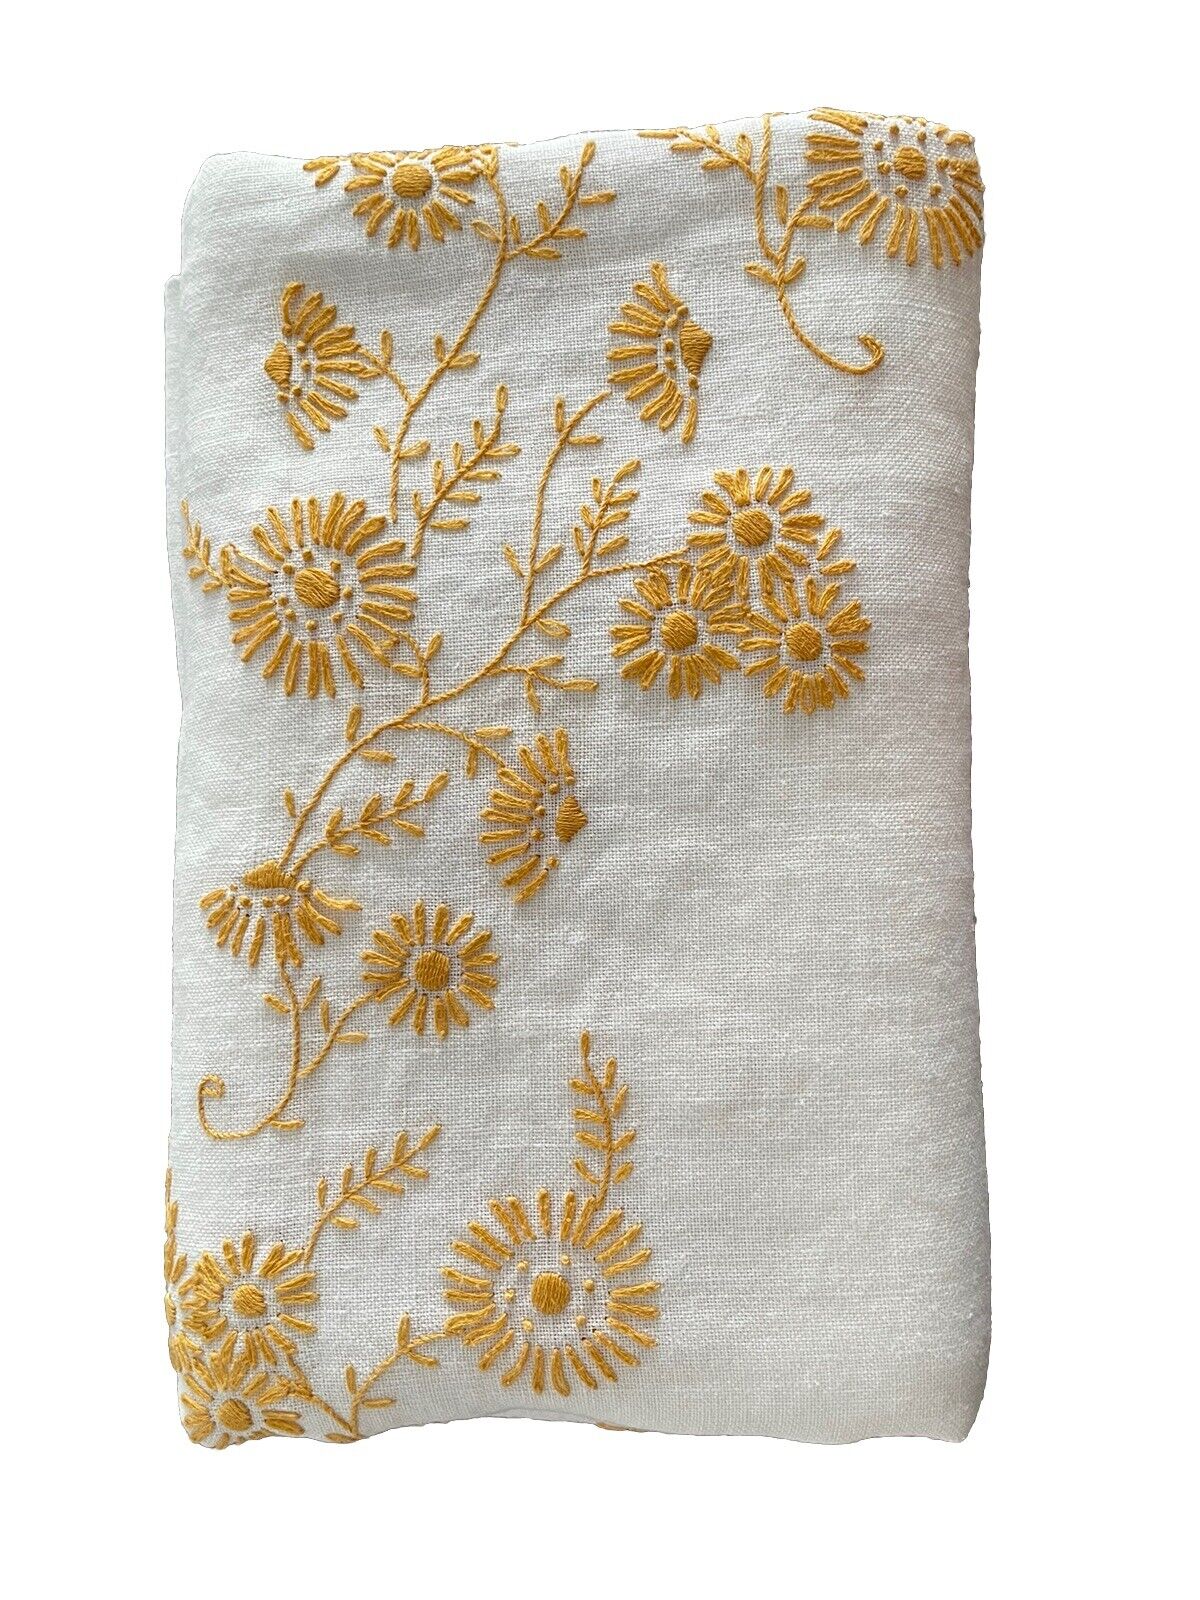 Vintage hand Embroidered White Linen Tablecloth Gold Floral Oval 82x56 *READ*